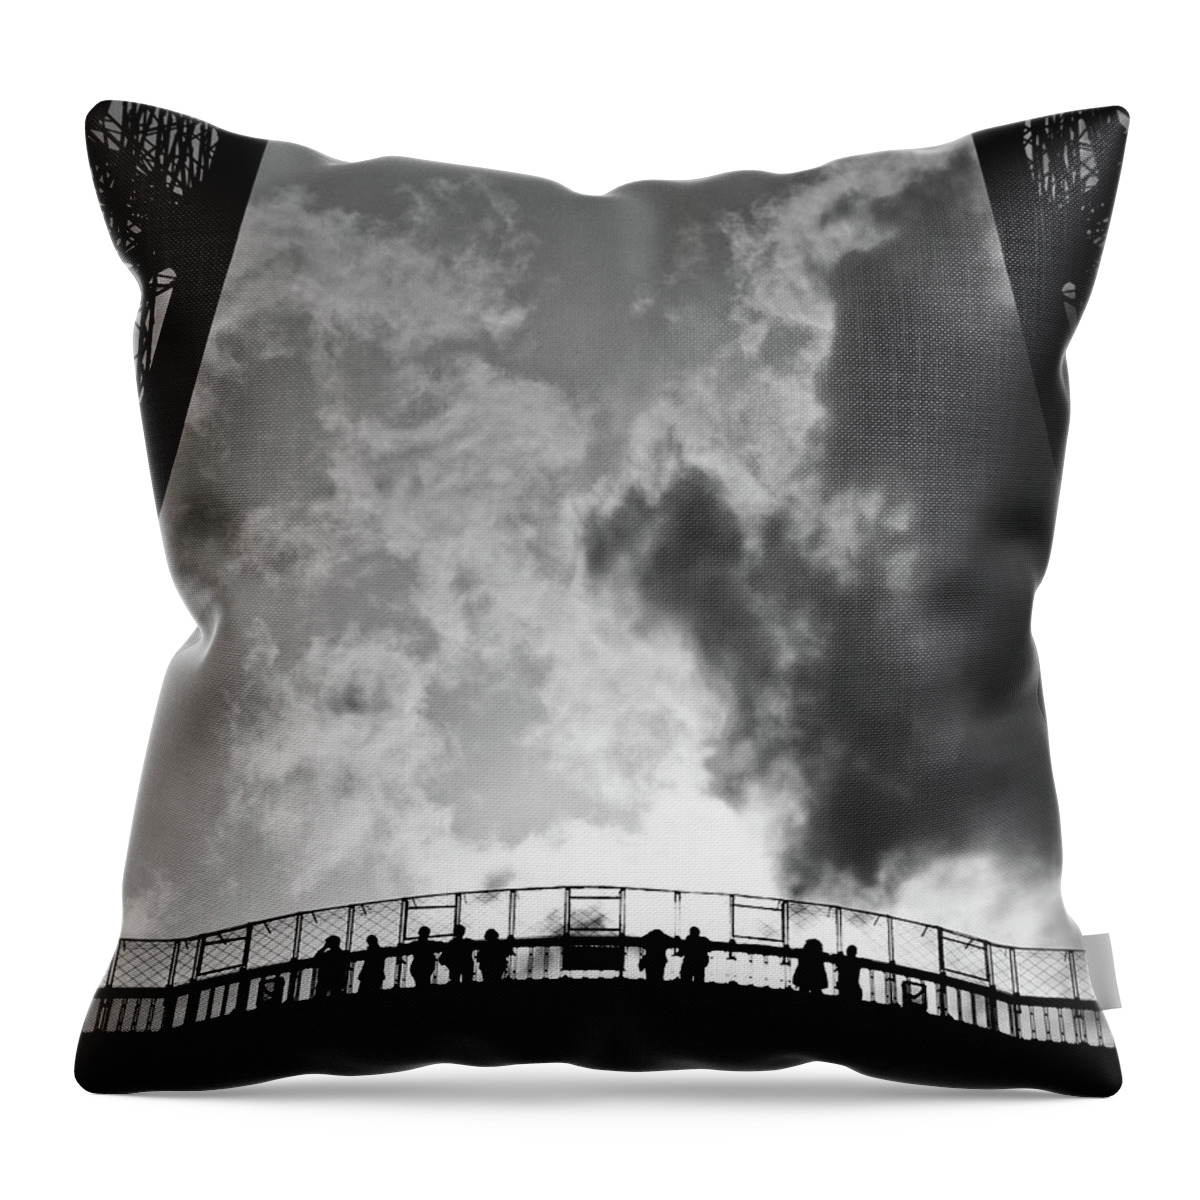 Eiffel Tower Throw Pillow featuring the photograph Eiffel Tower by Mark A Paulda